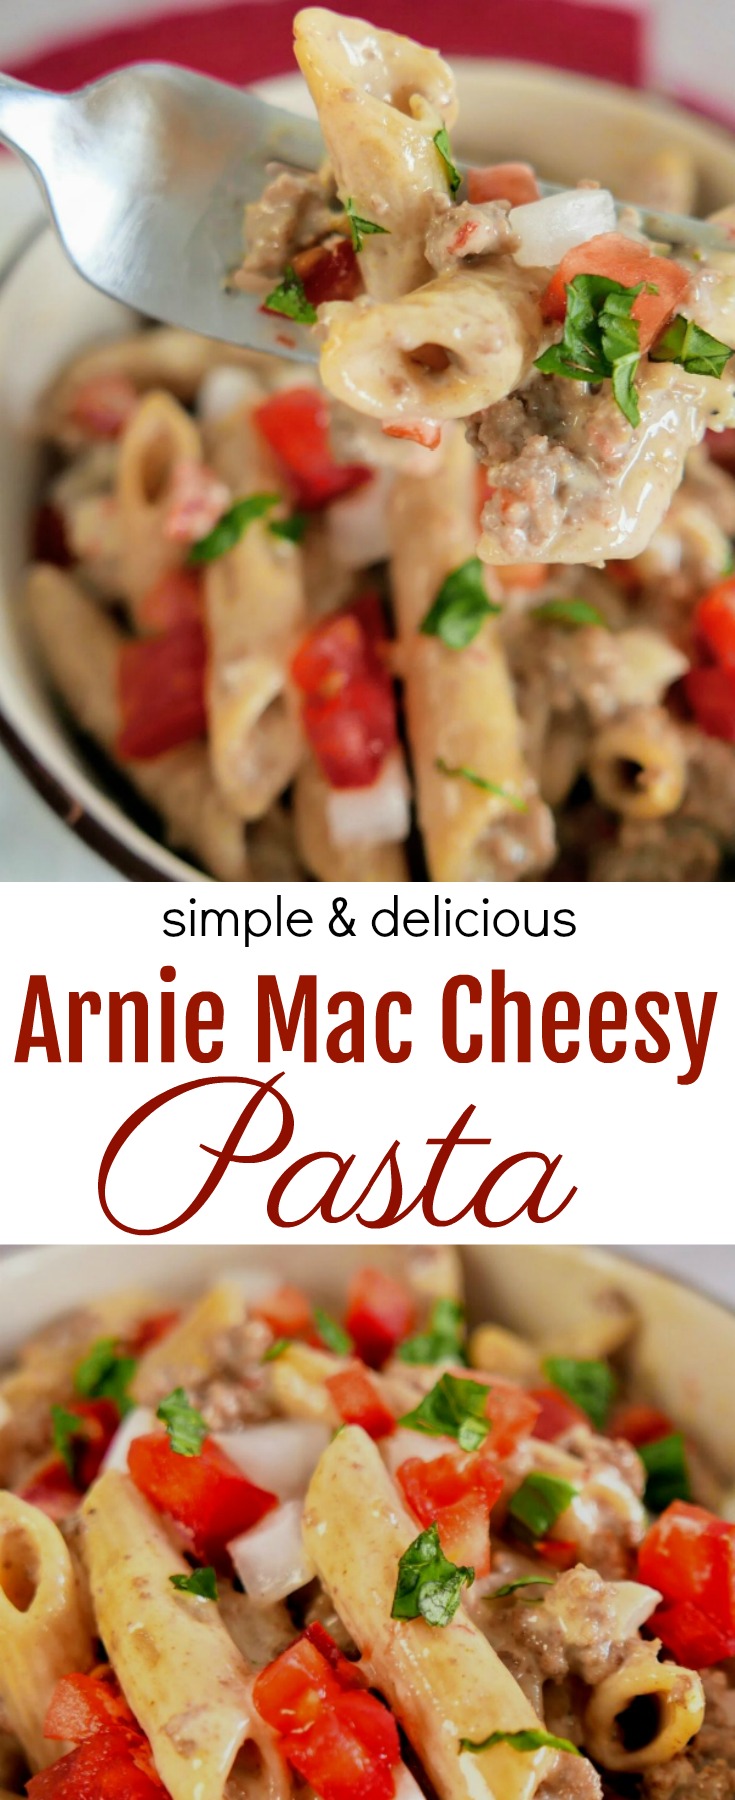 Creamy cheesy sauce wraps around penne pasta and ground beef to make this delicious Arnie Mac Cheesy Pasta – it’ll be a new family favorite!